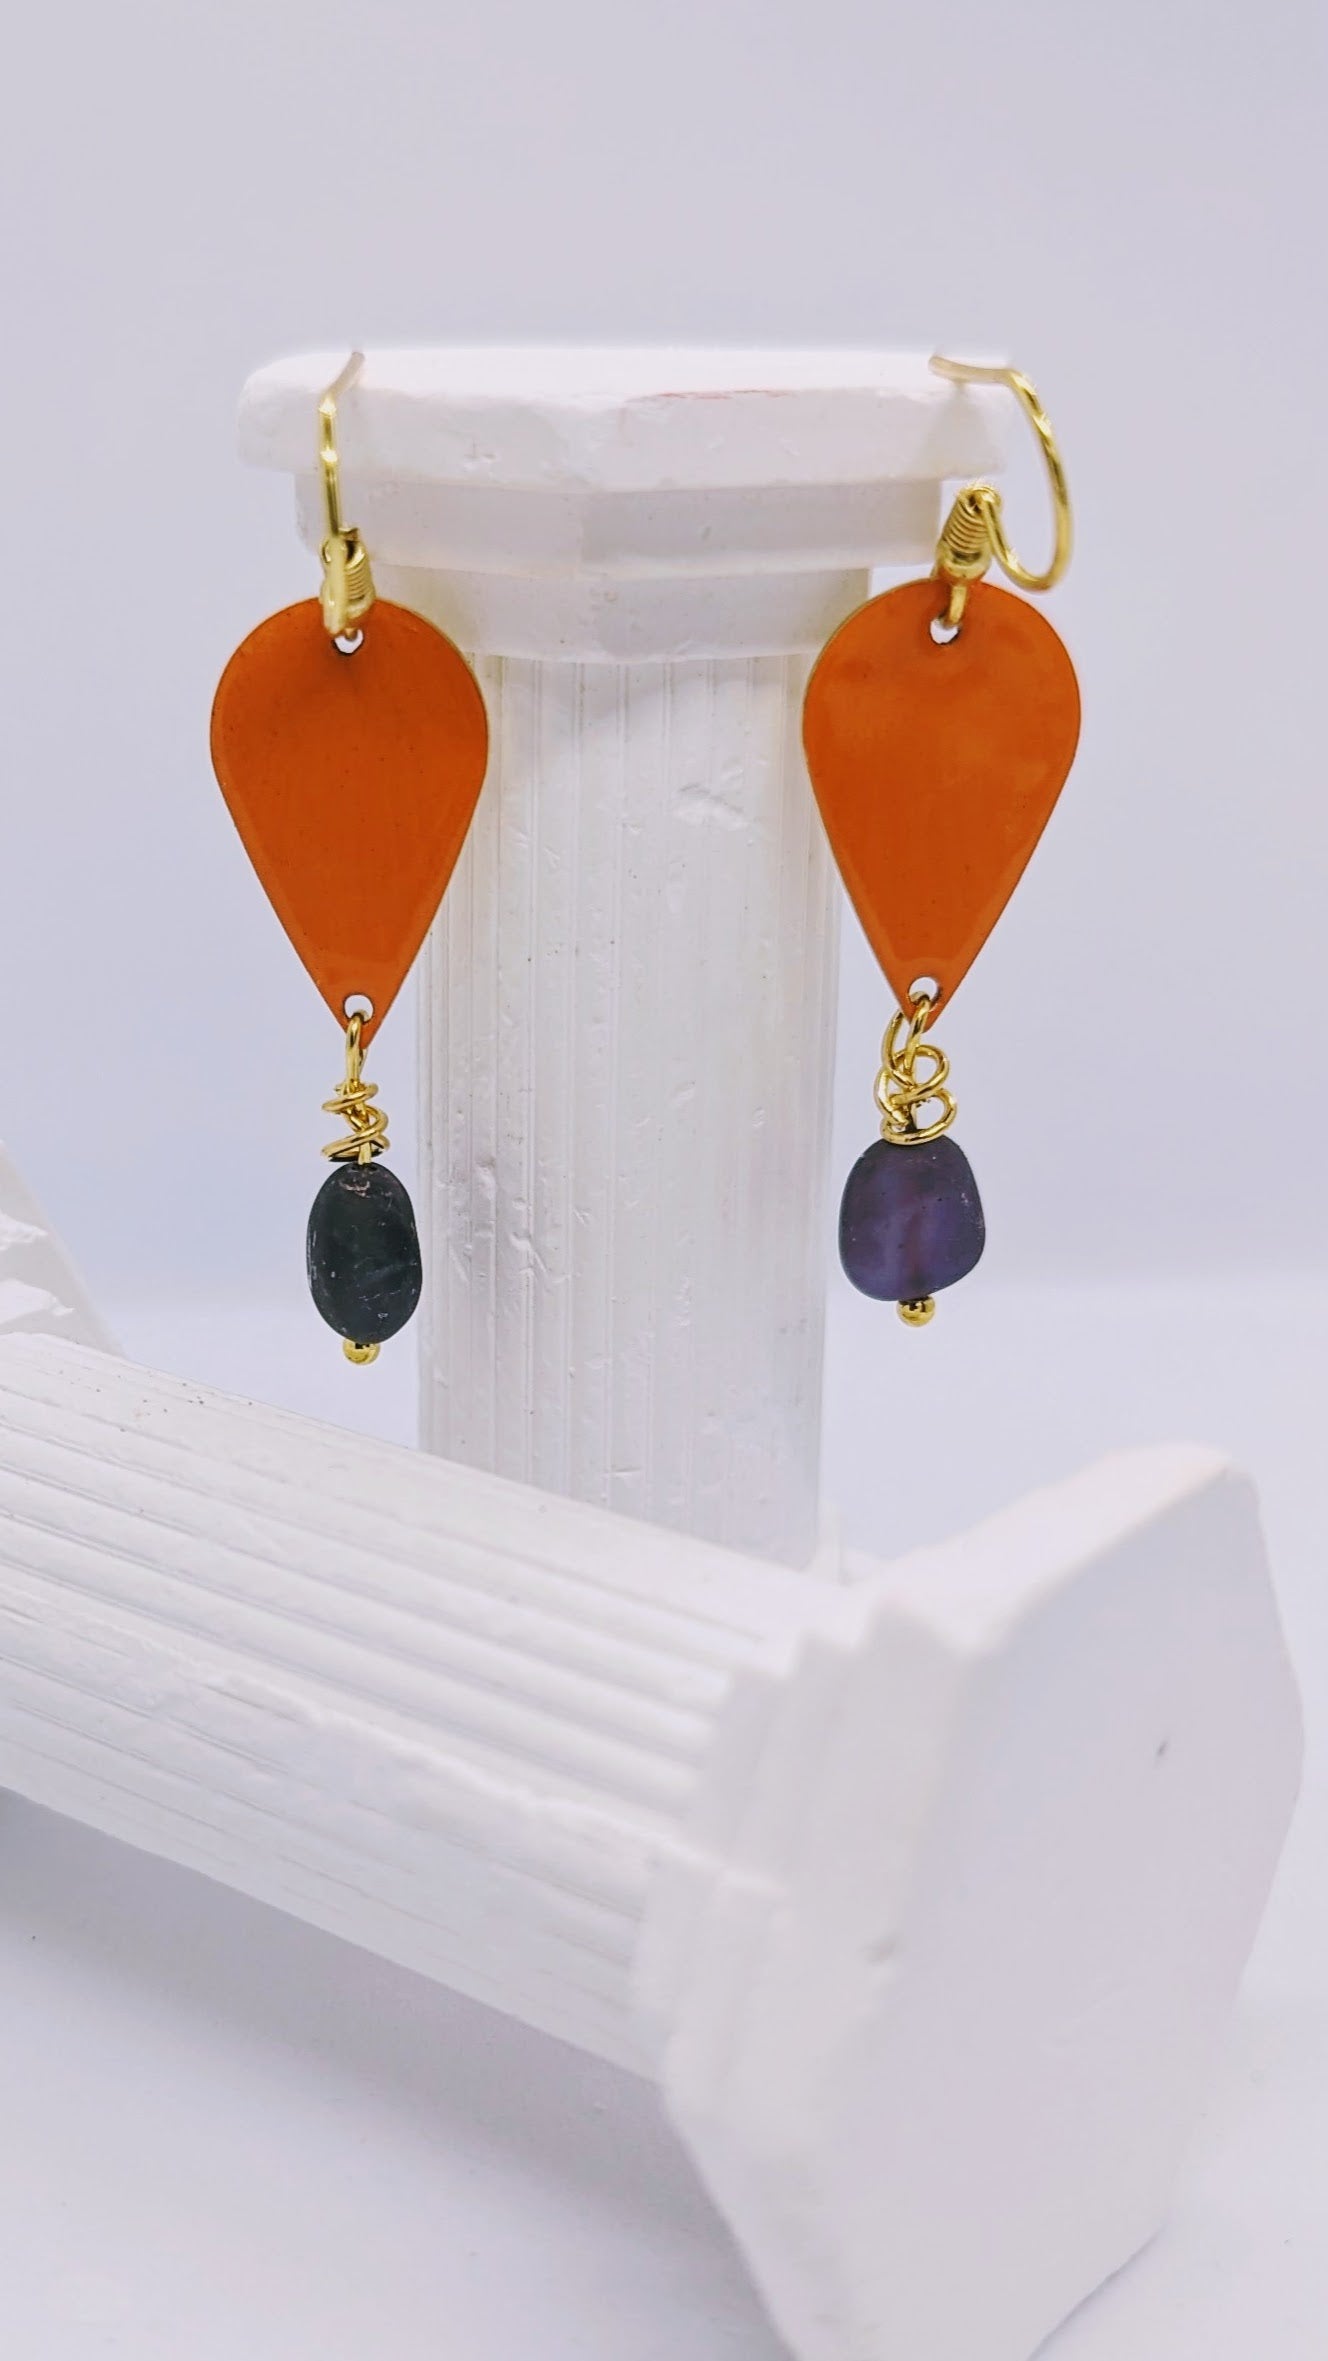 Earrings displayed on white columns. Enamelled tear drop brass in a orange colour embellished with a amethyst each. The earrings are hanging from sterling silver earring hooks.